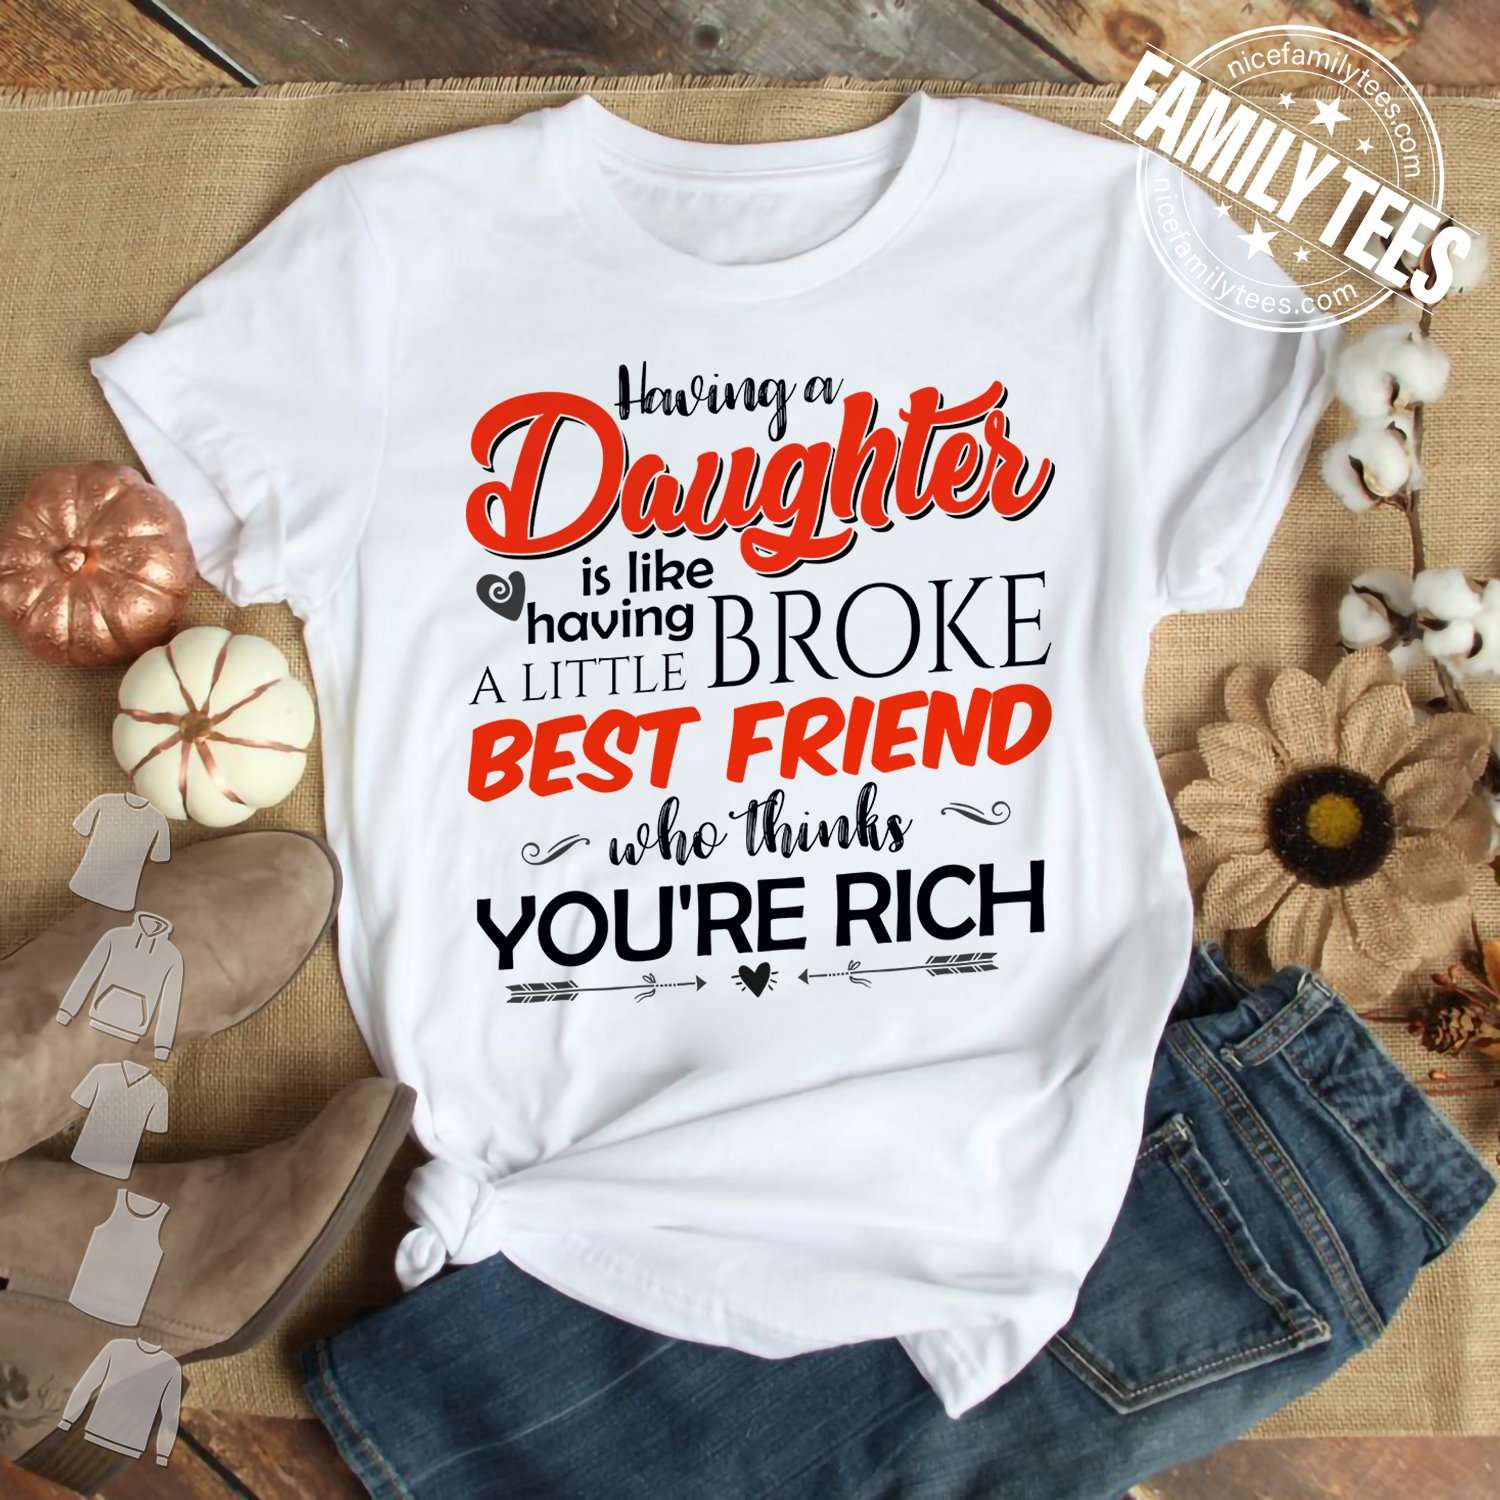 Having a daughter is like having a little broke best friend who thinks you're rich - Daughter best friend